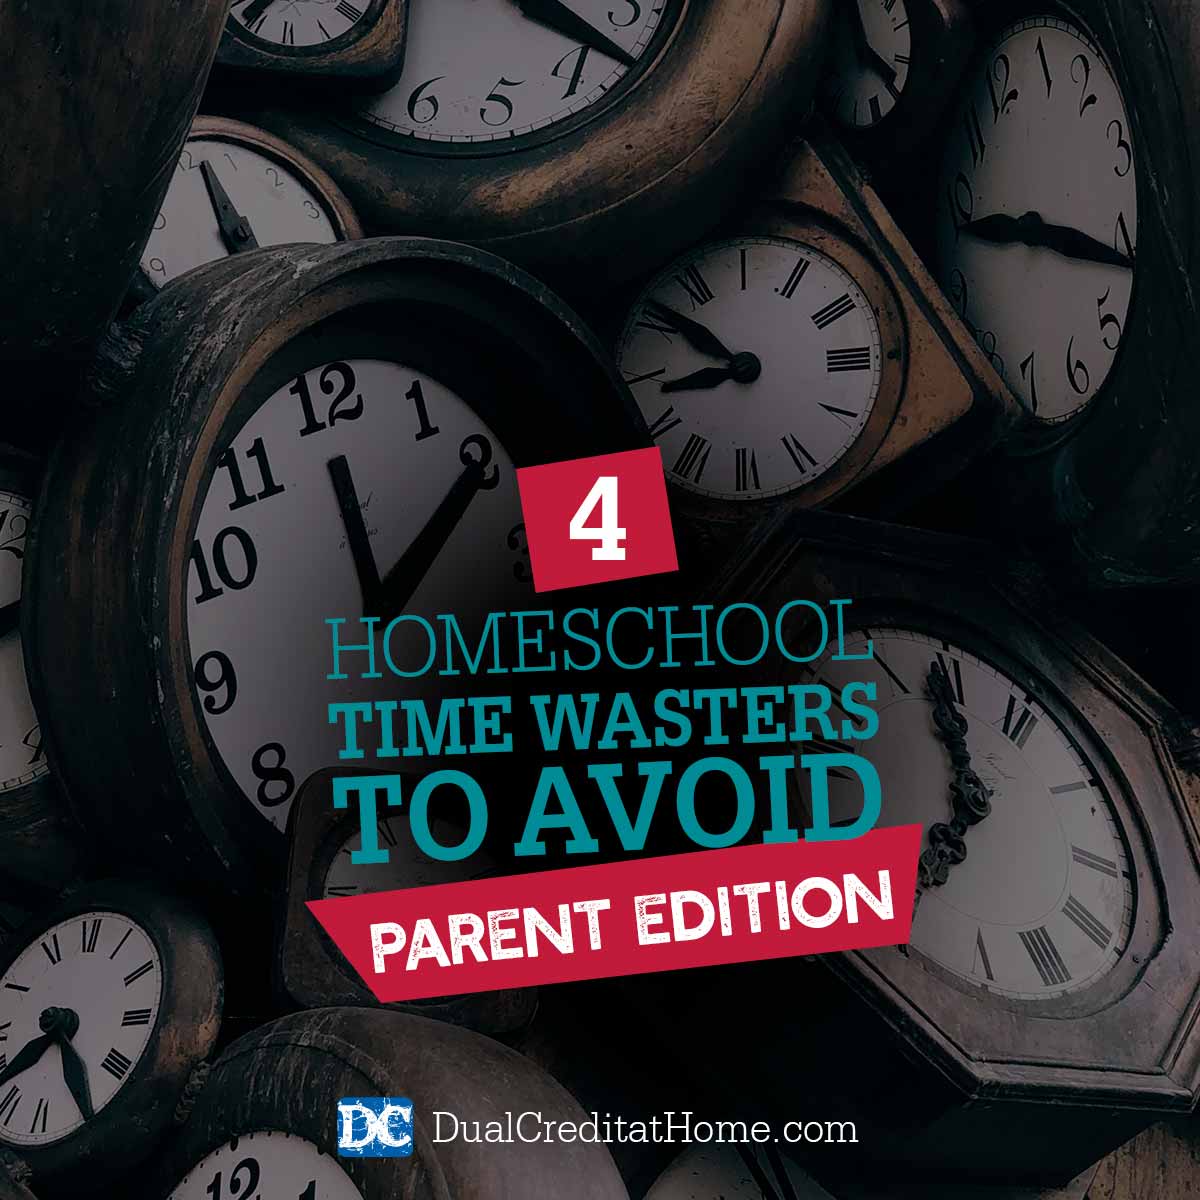 4 Homeschool Time Wasters to Avoid - Parent Edition